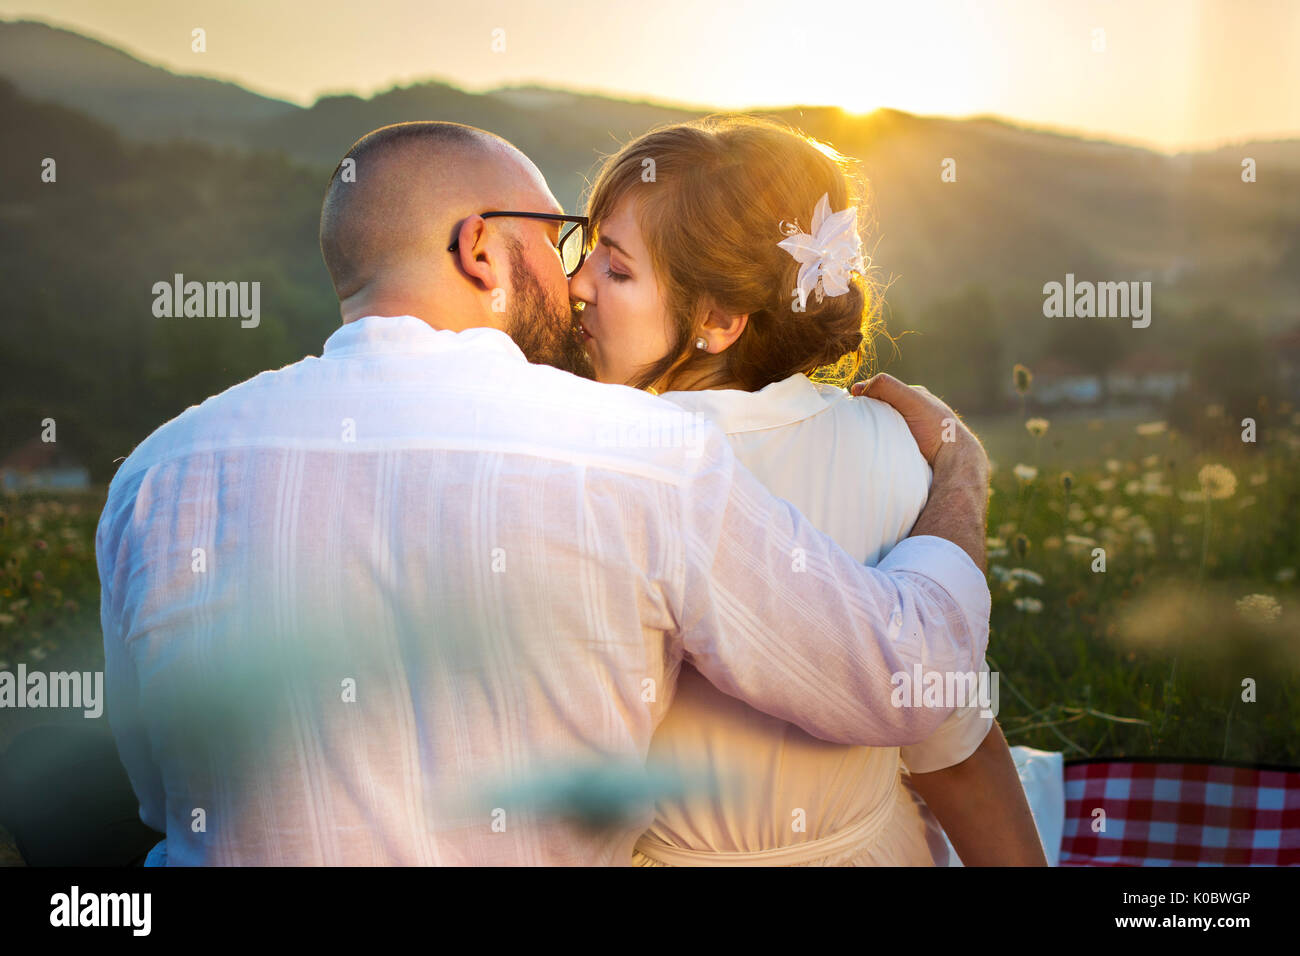 Couple kissing on picnic with romantic sunset view Stock Photo